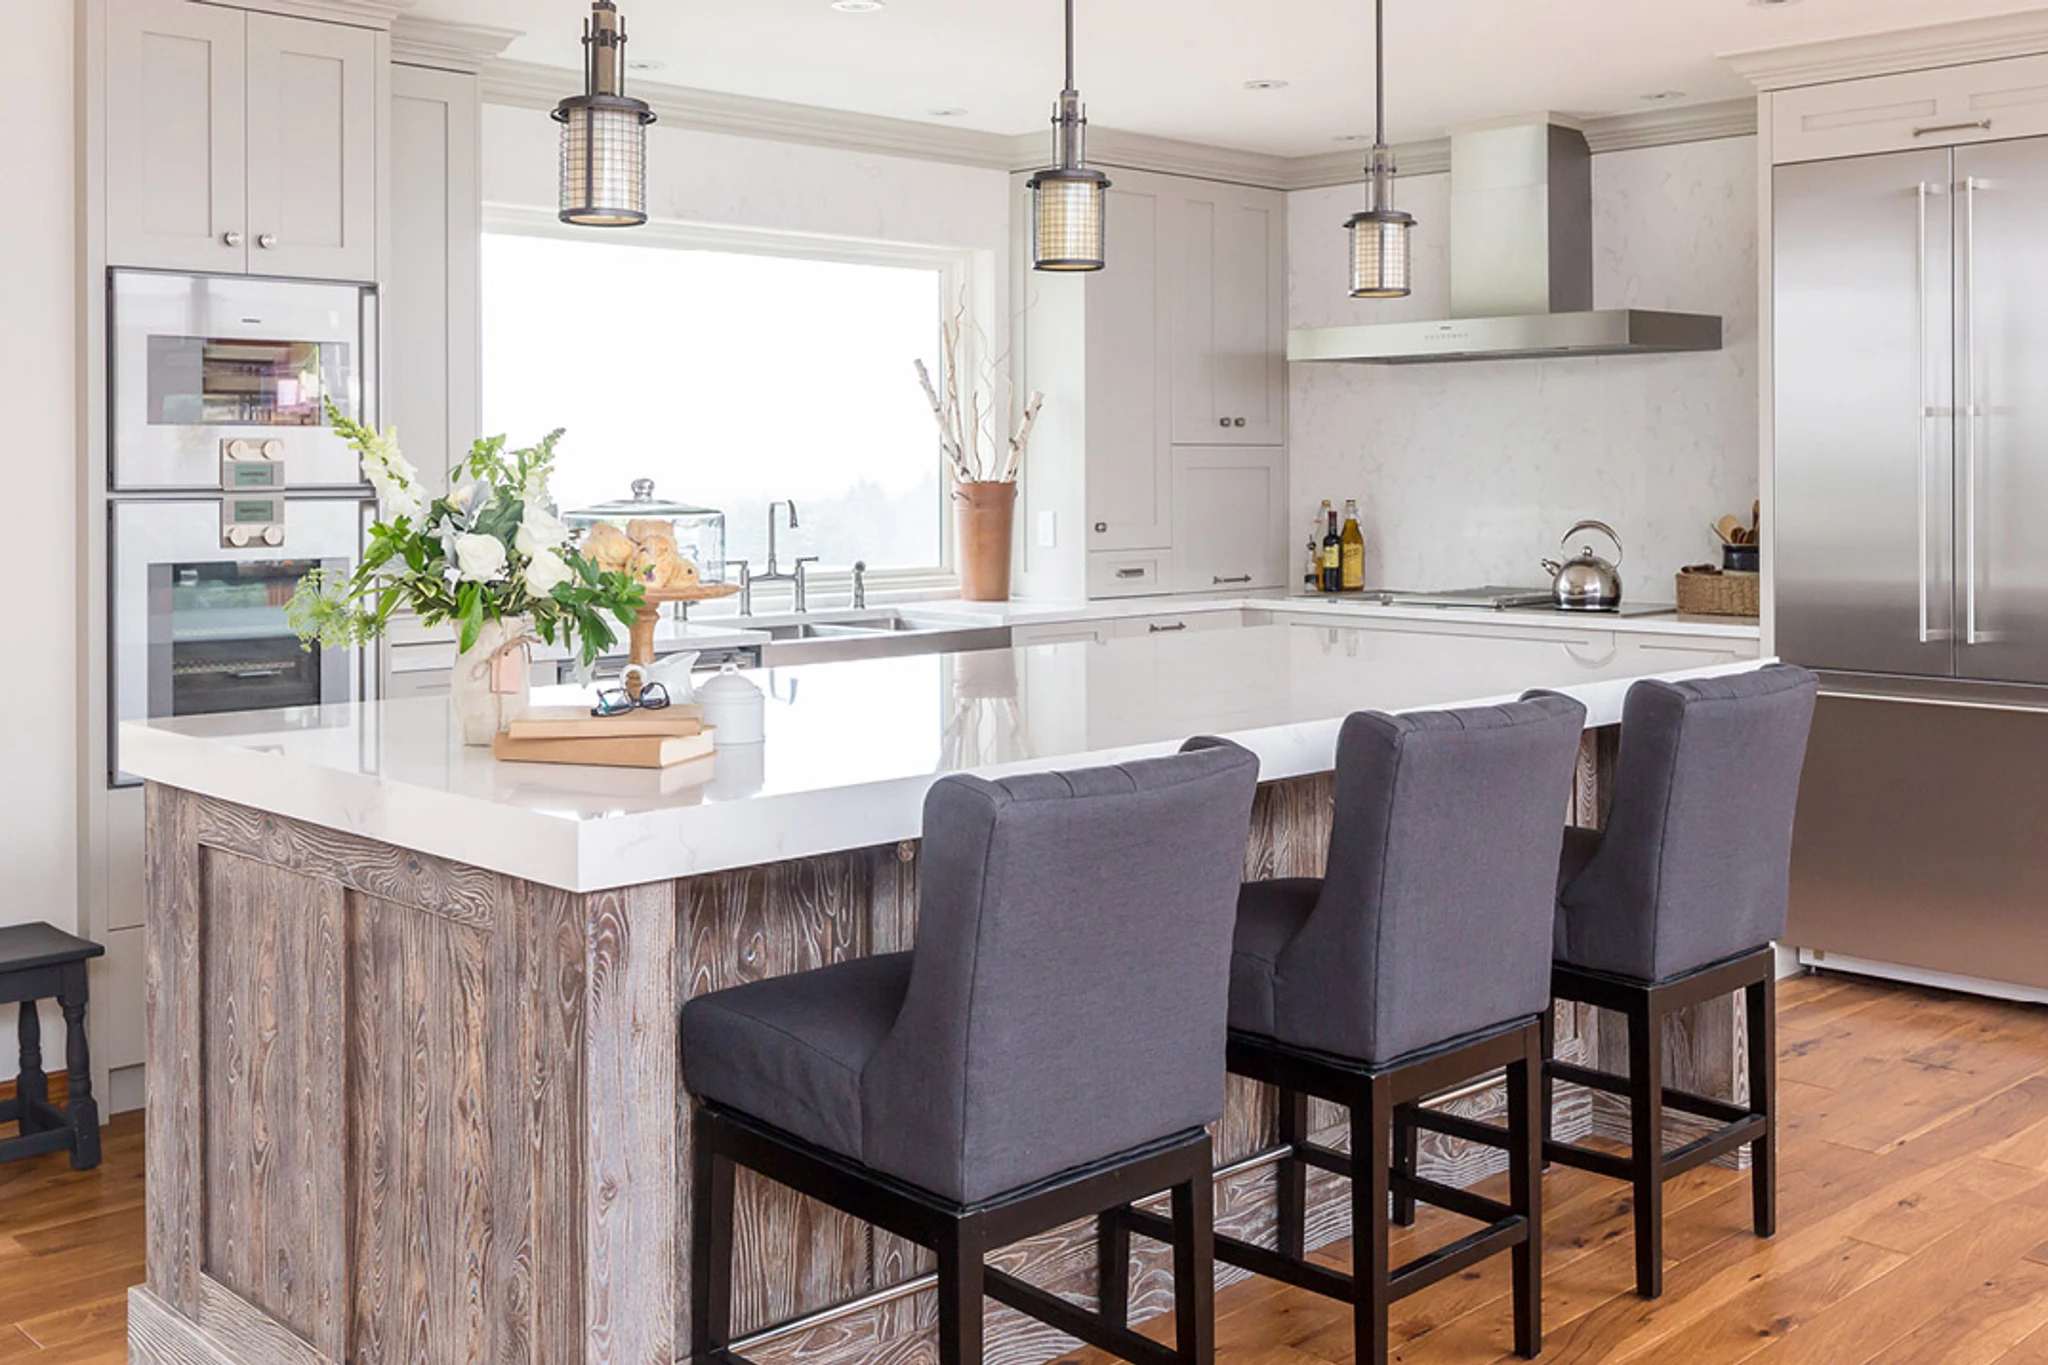 a gorgeous kitchen with a wooden island topped with Cambria Quartz Torquay countertops, three blue barstools, large window over the sink, and modern range.